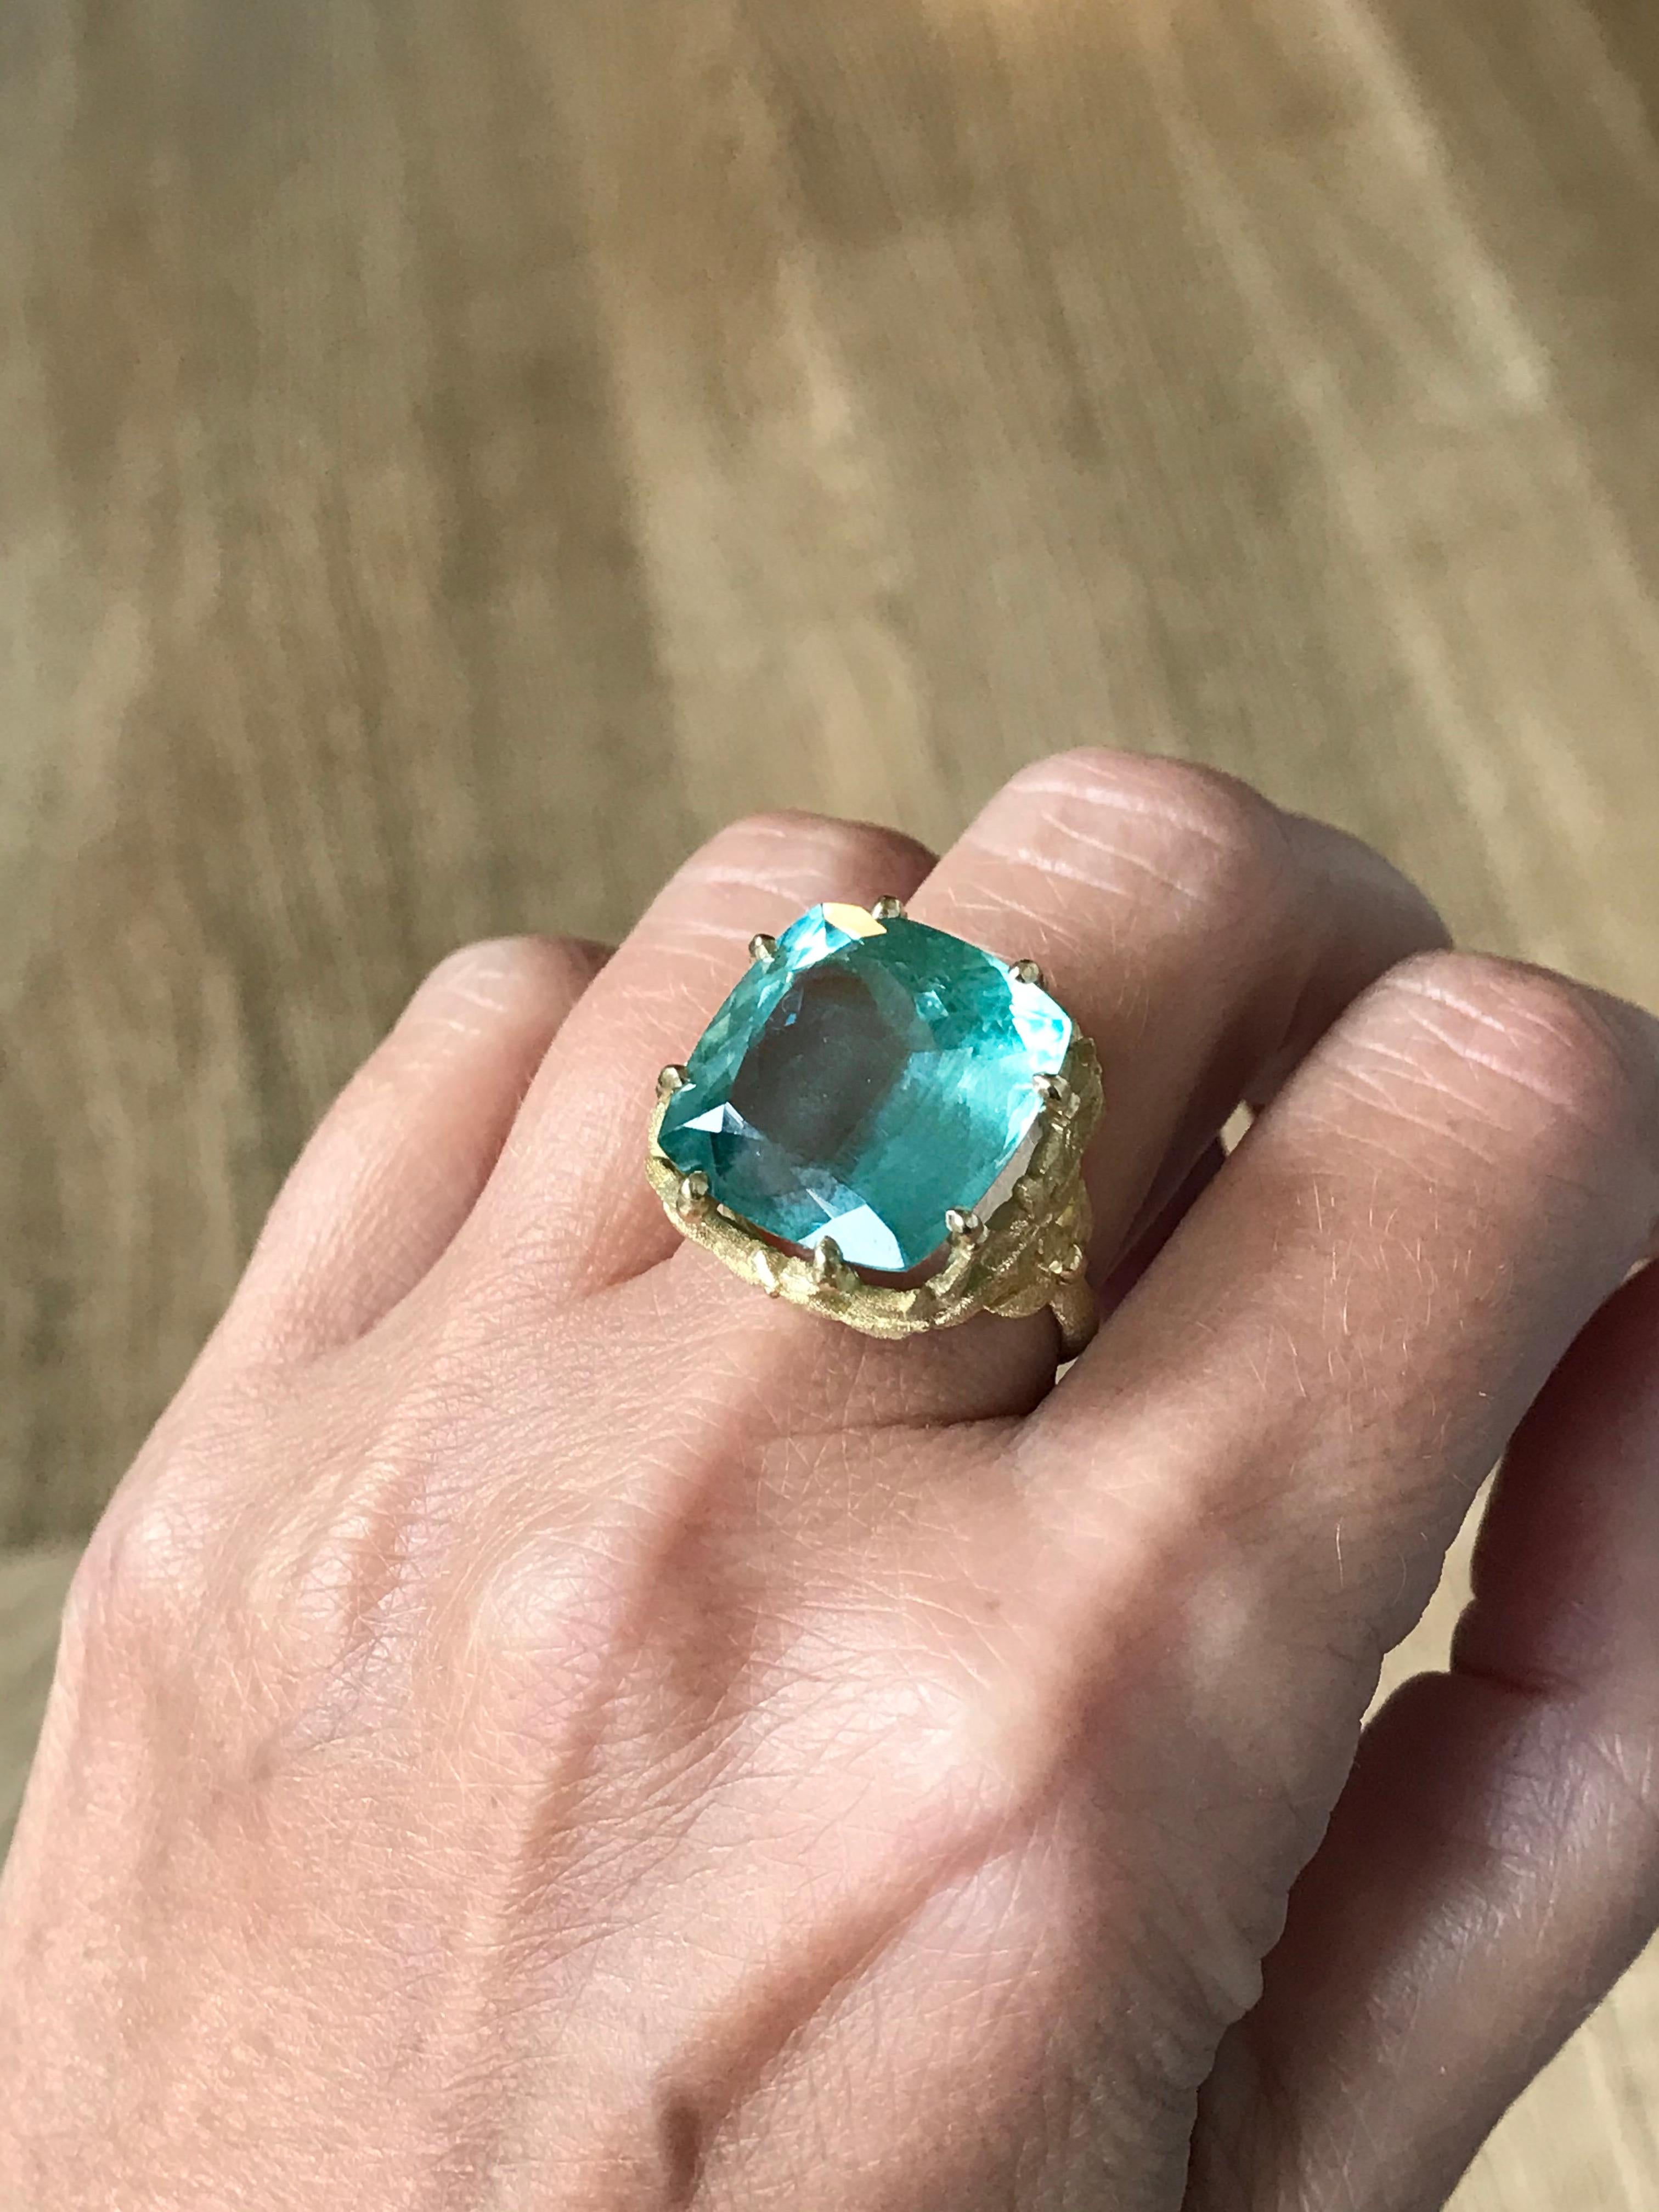 Dalben design 18 kt engraved yellow gold Cocktail Ring with a Cushion cut  blue-green Aquamarine weighting 17,7 carat .  
Ring size 7  1/4 USA - 55 EU resizable to most finger sizes.  
Bezel setting dimension: 
width 19,7 mm, height 19 mm.  
The